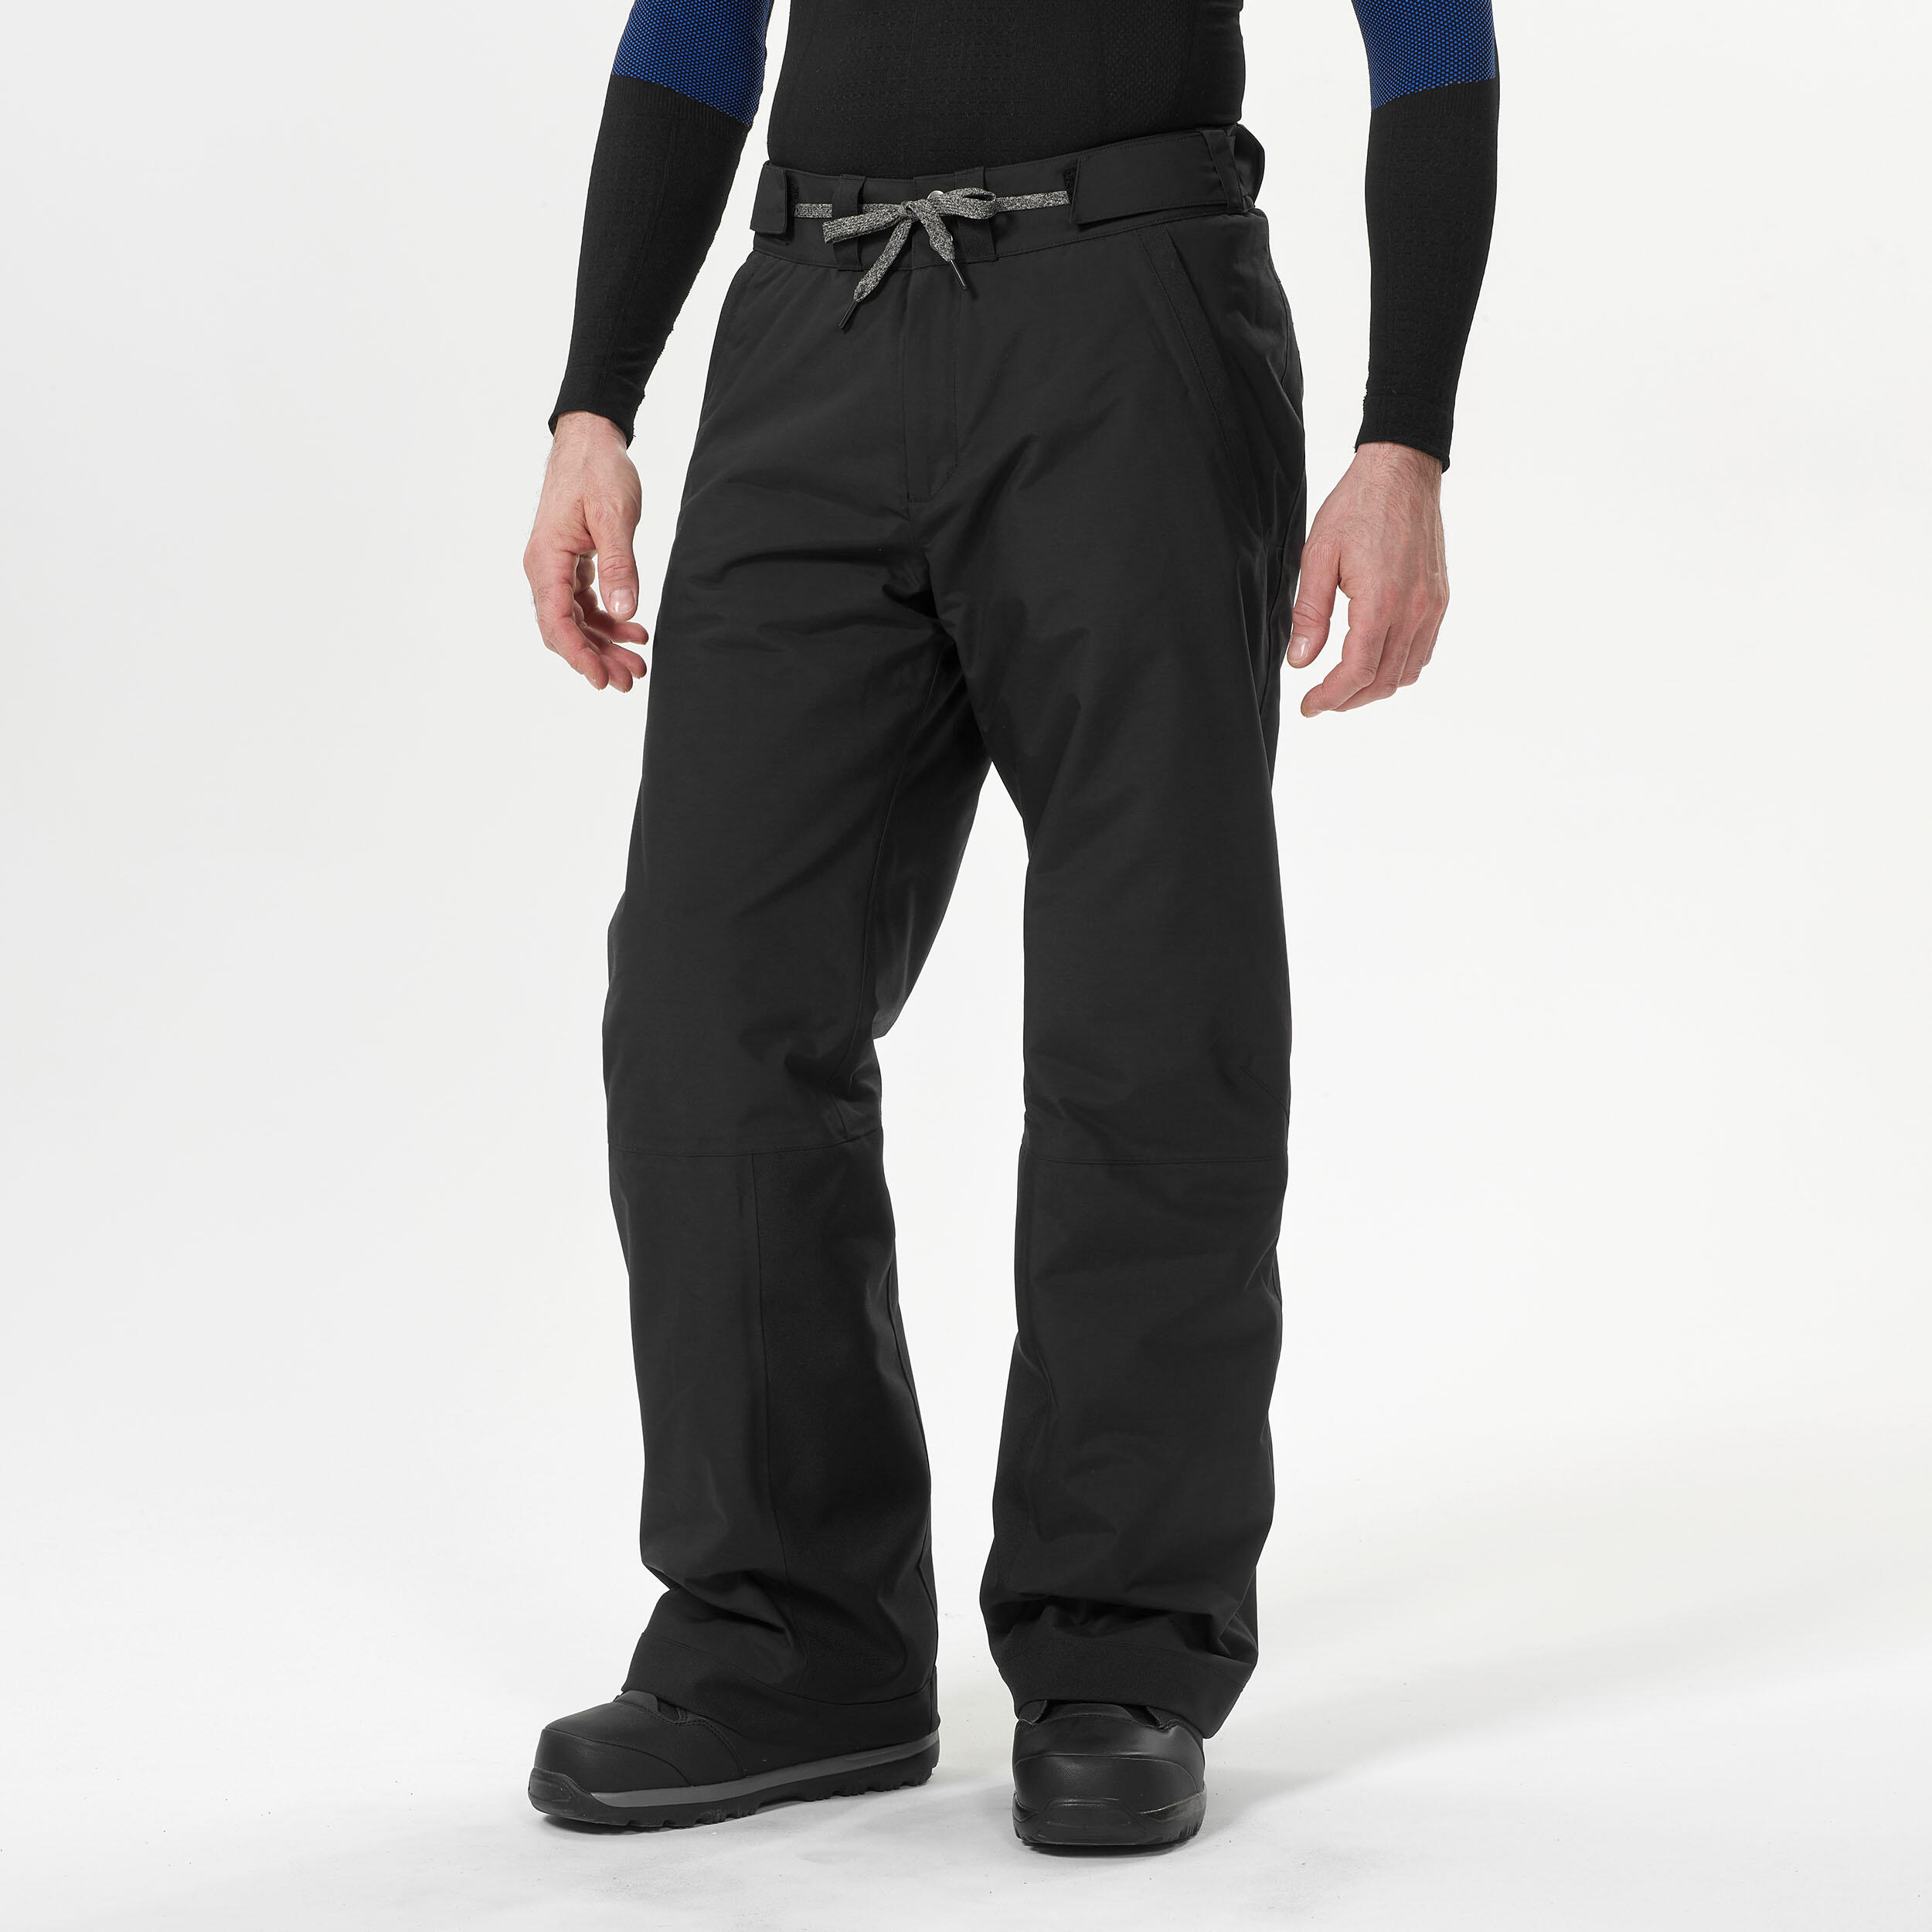 Wedze by Decathlon Flared Women Black Trousers - Buy Wedze by Decathlon  Flared Women Black Trousers Online at Best Prices in India | Flipkart.com